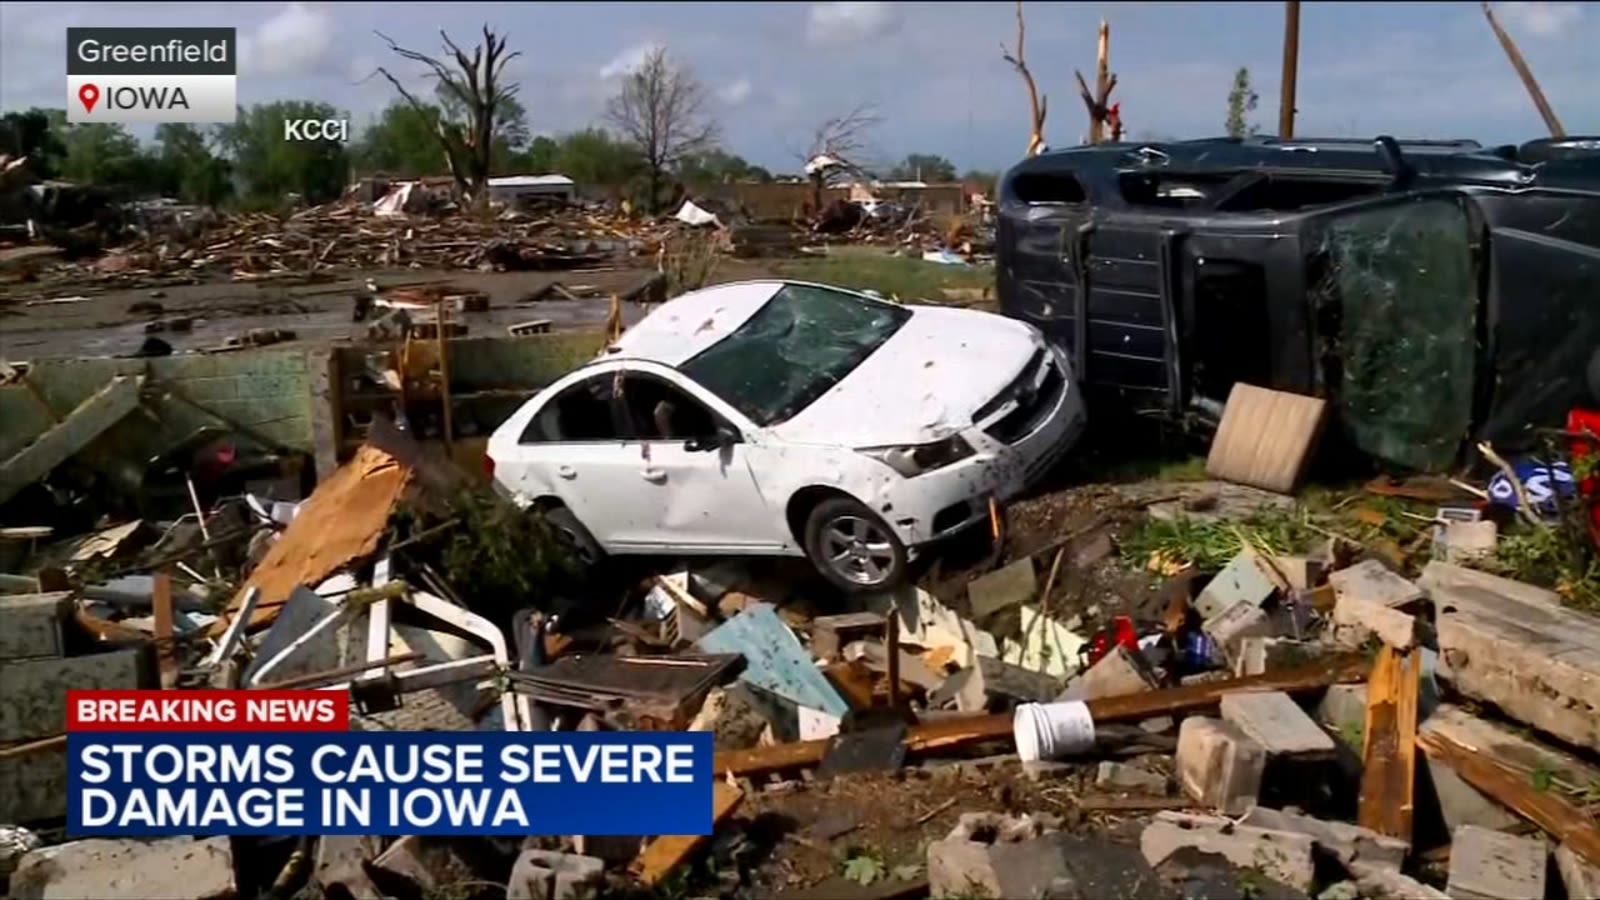 Iowa tornadoes kill 1, cause major damage in Greenfield, south of Des Moines, amid severe storms